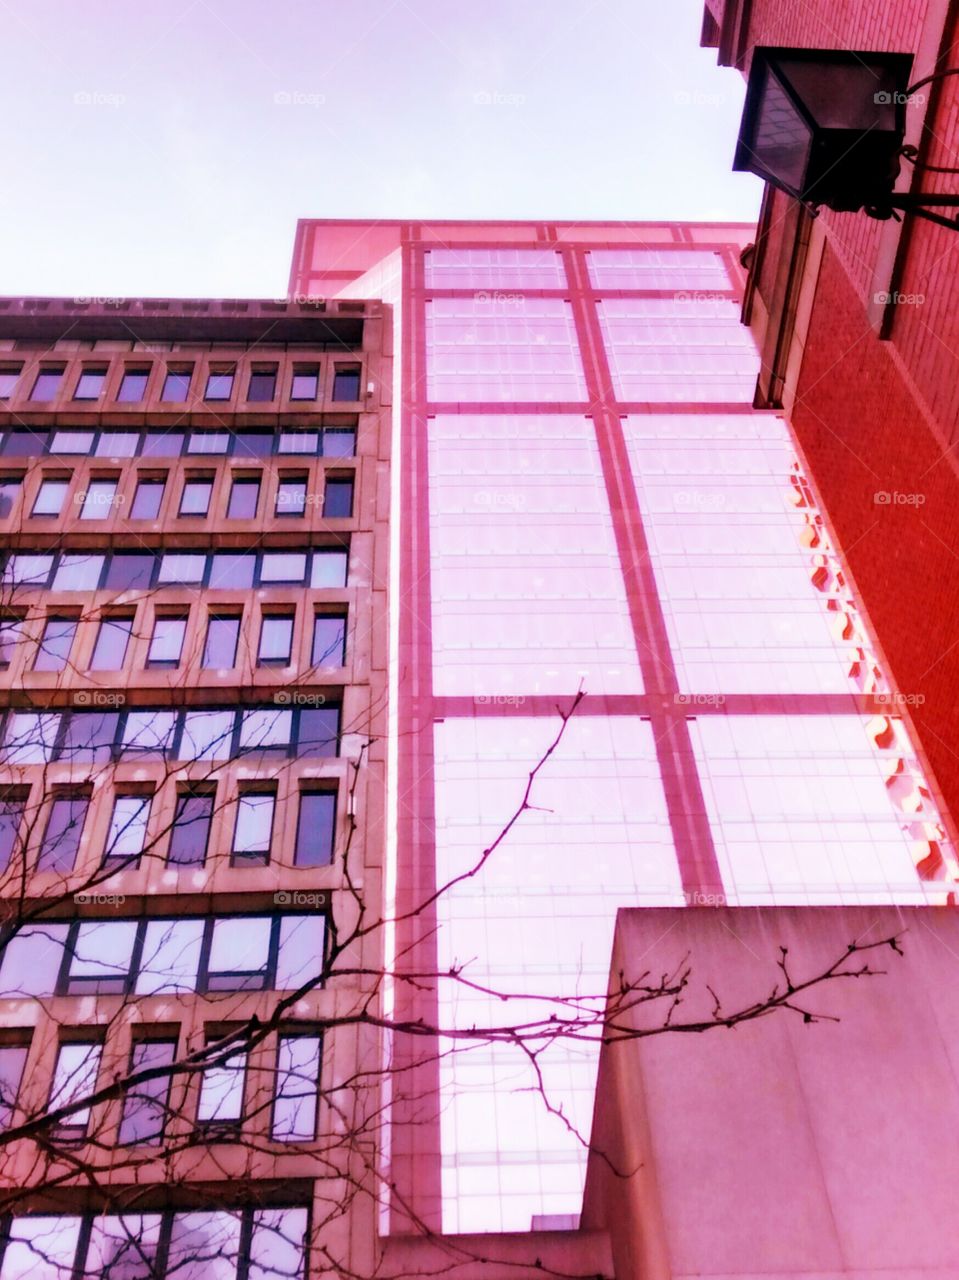 Building with pink mirror windows